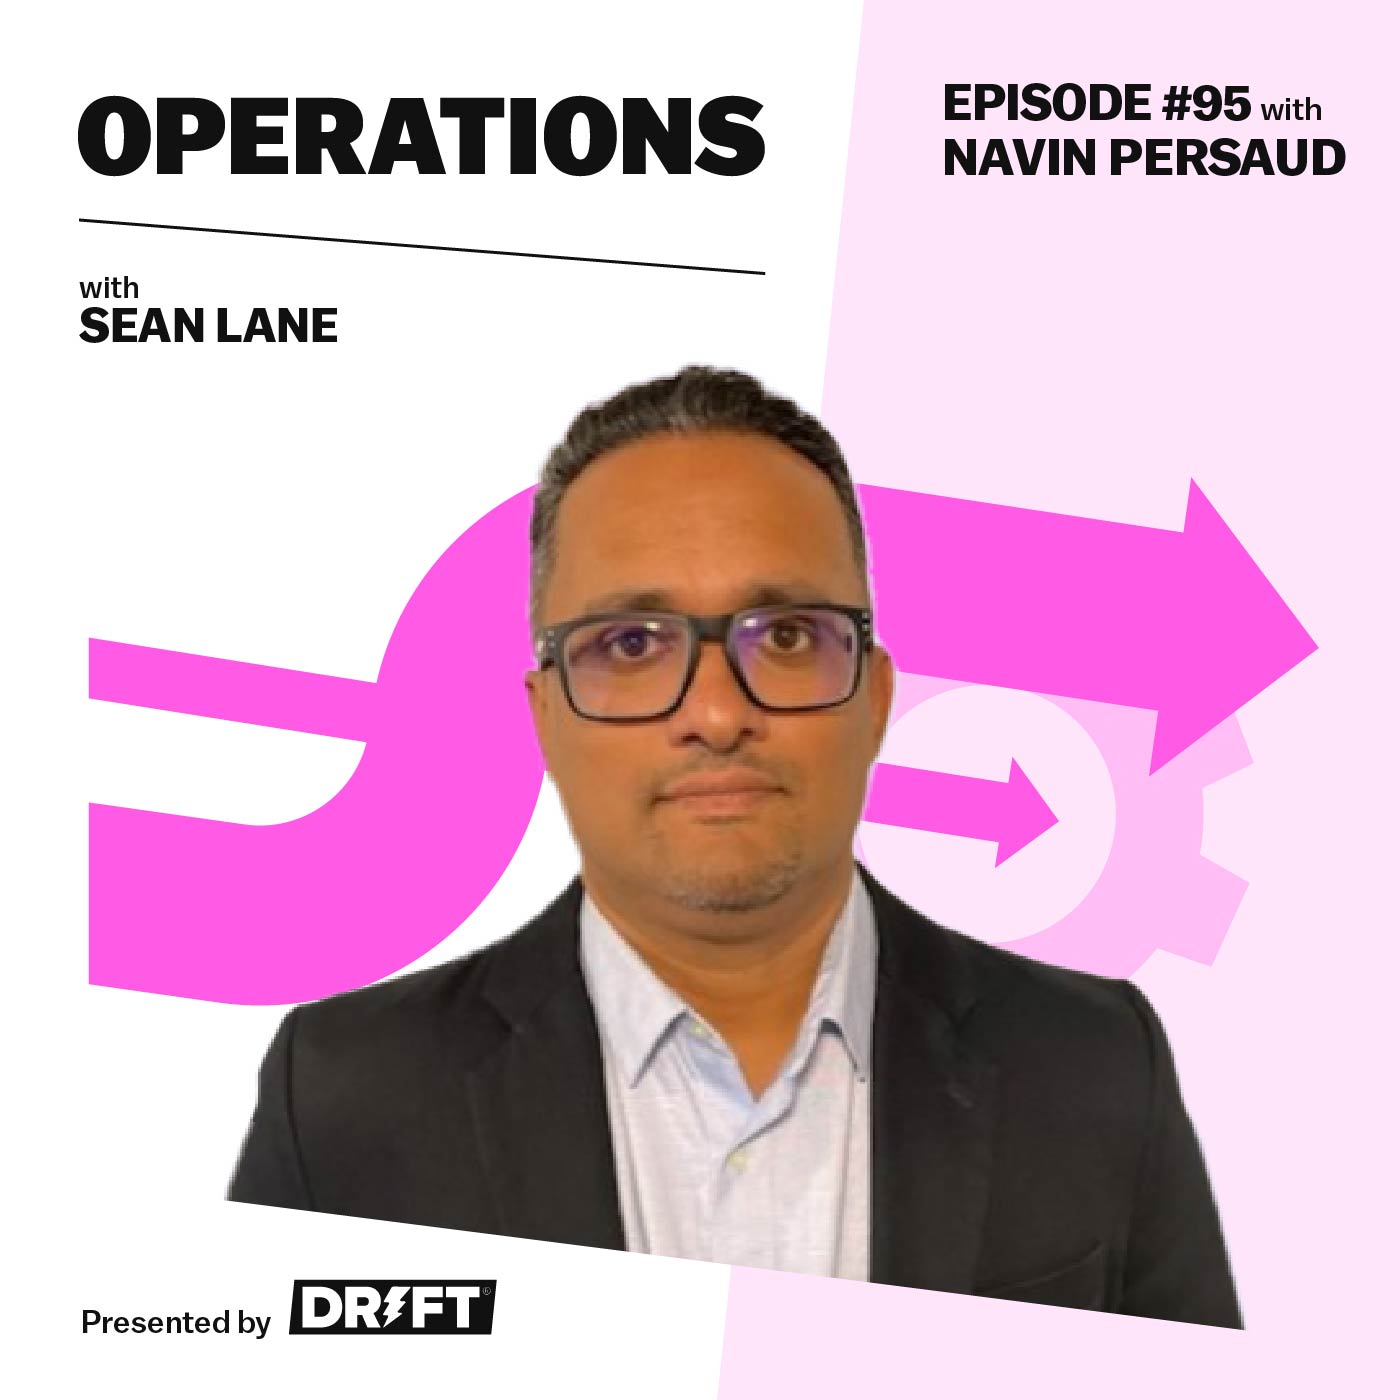 Why Operators are Attracted to Pain with 1Password's Navin Persaud